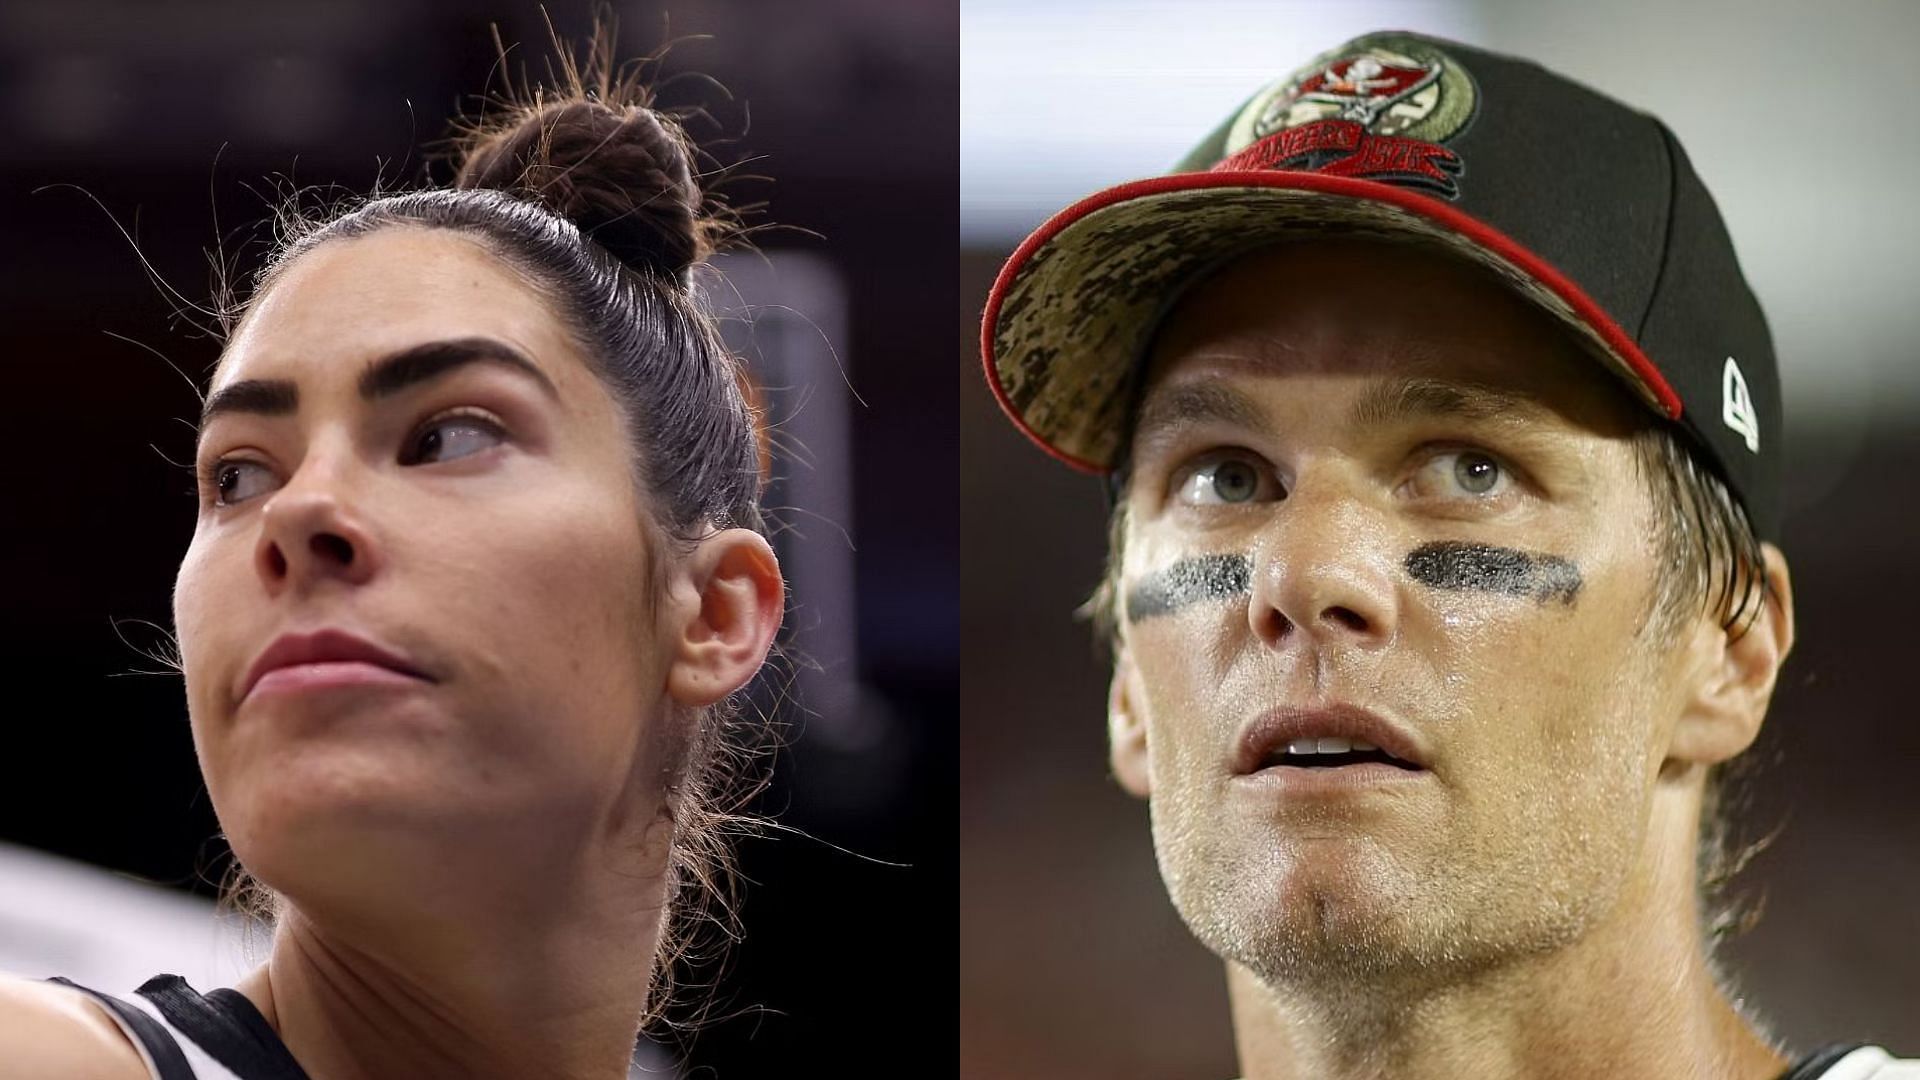 Tom Brady is now a part-owner of the Las Vegas Aces, a team that has Kelsey Plum as one of their stars.